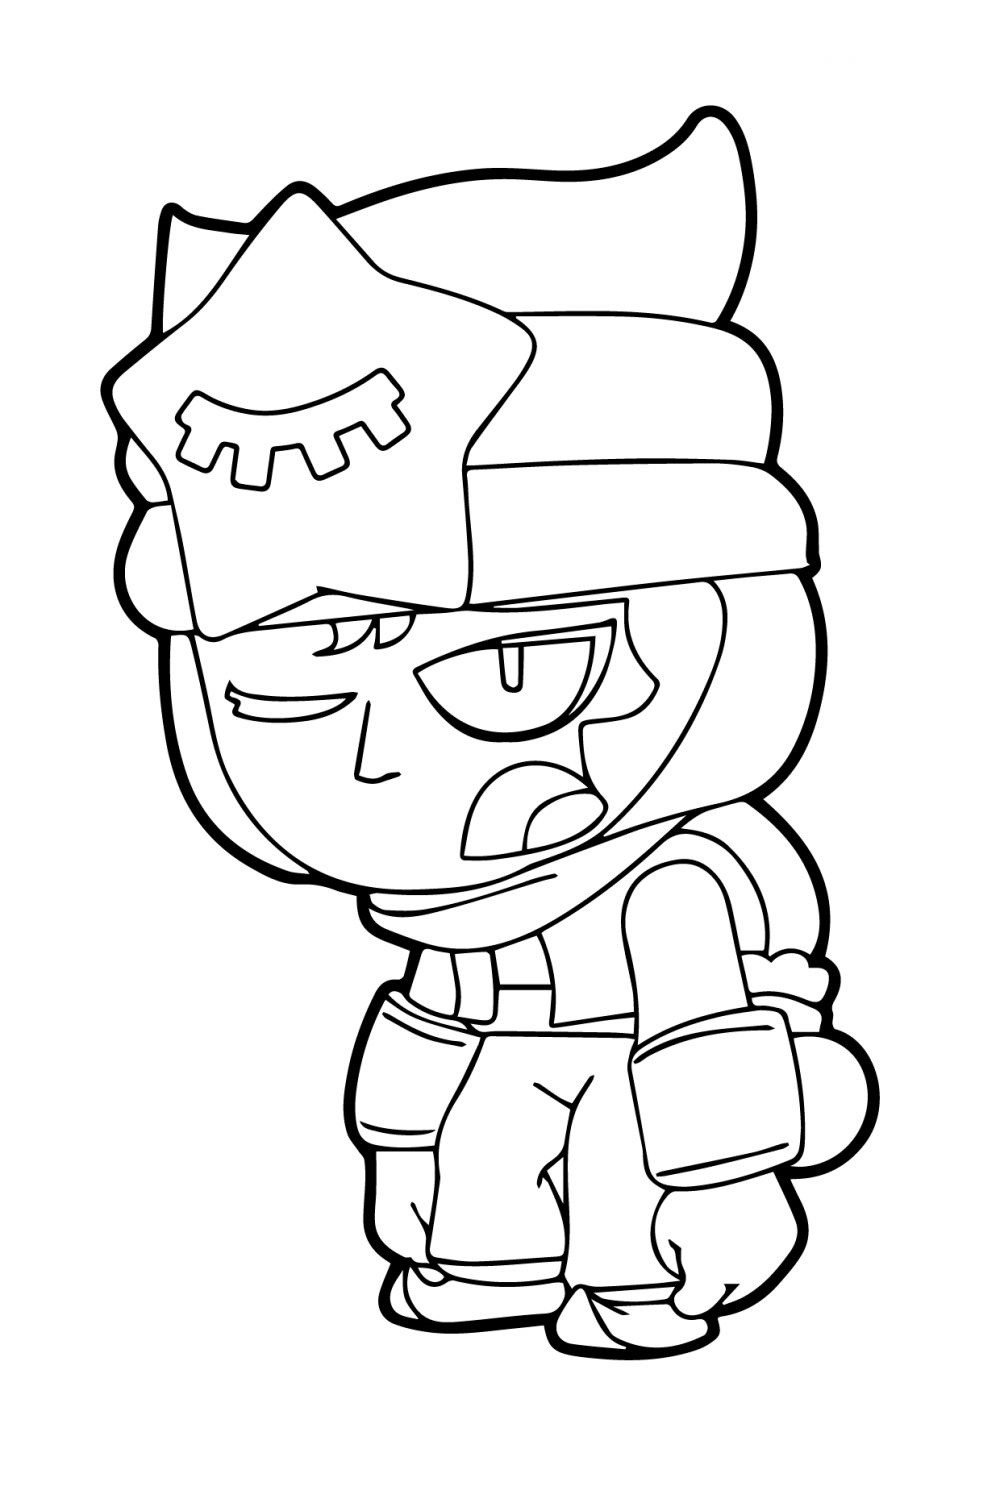 Sandy Coloring Pages Print Brawl Stars Character For Free - image brawl stars a imprimer